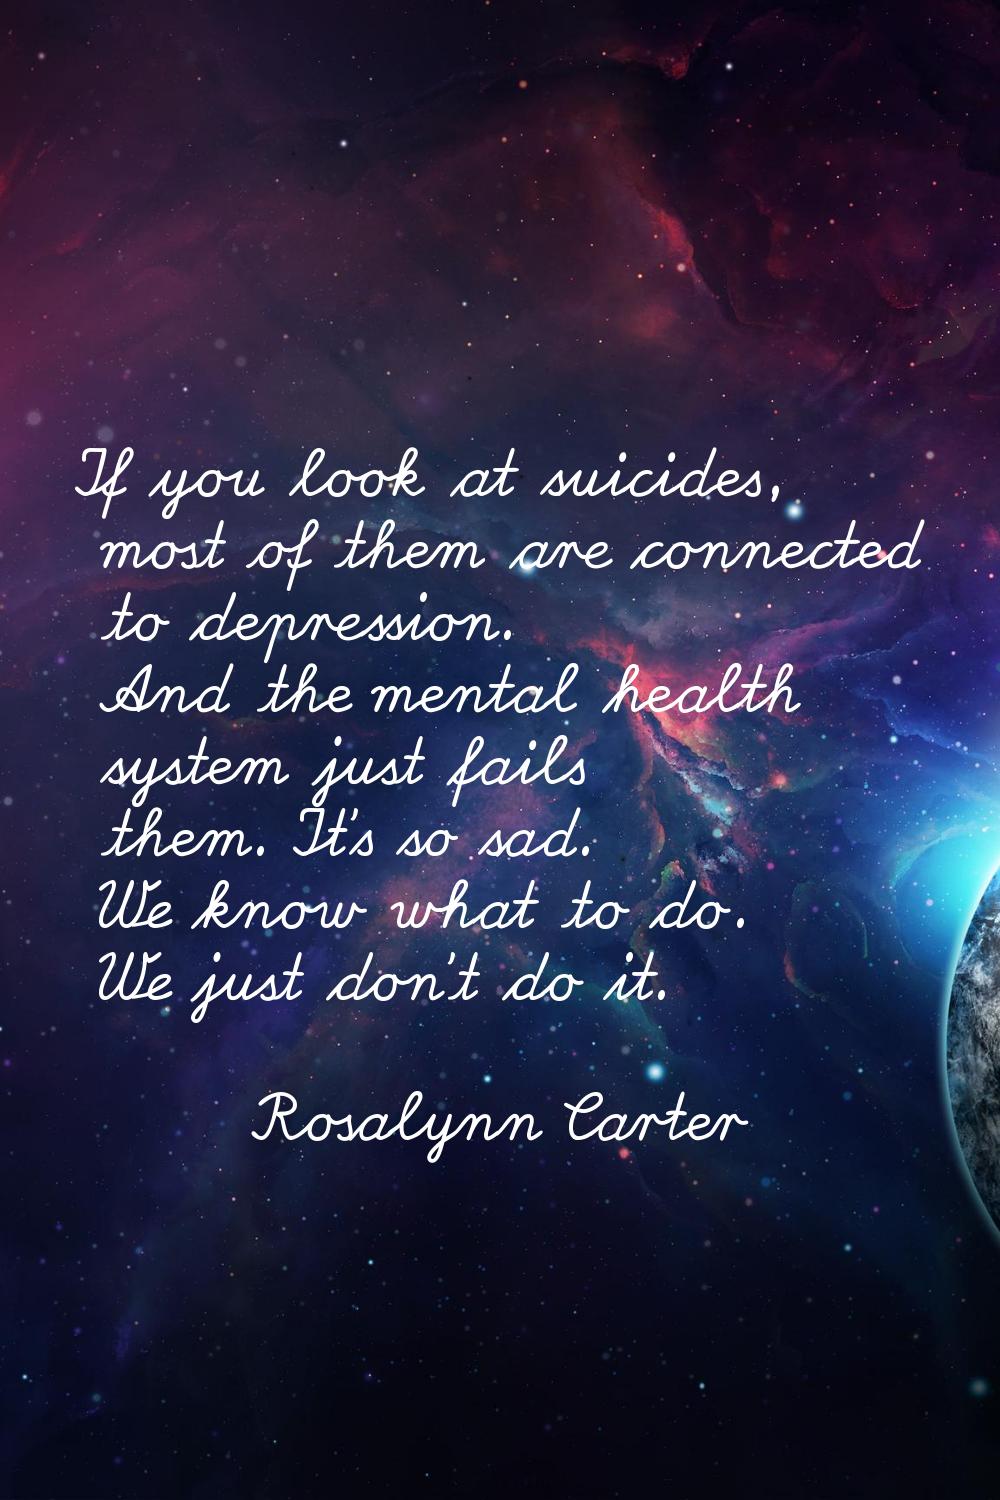 If you look at suicides, most of them are connected to depression. And the mental health system jus